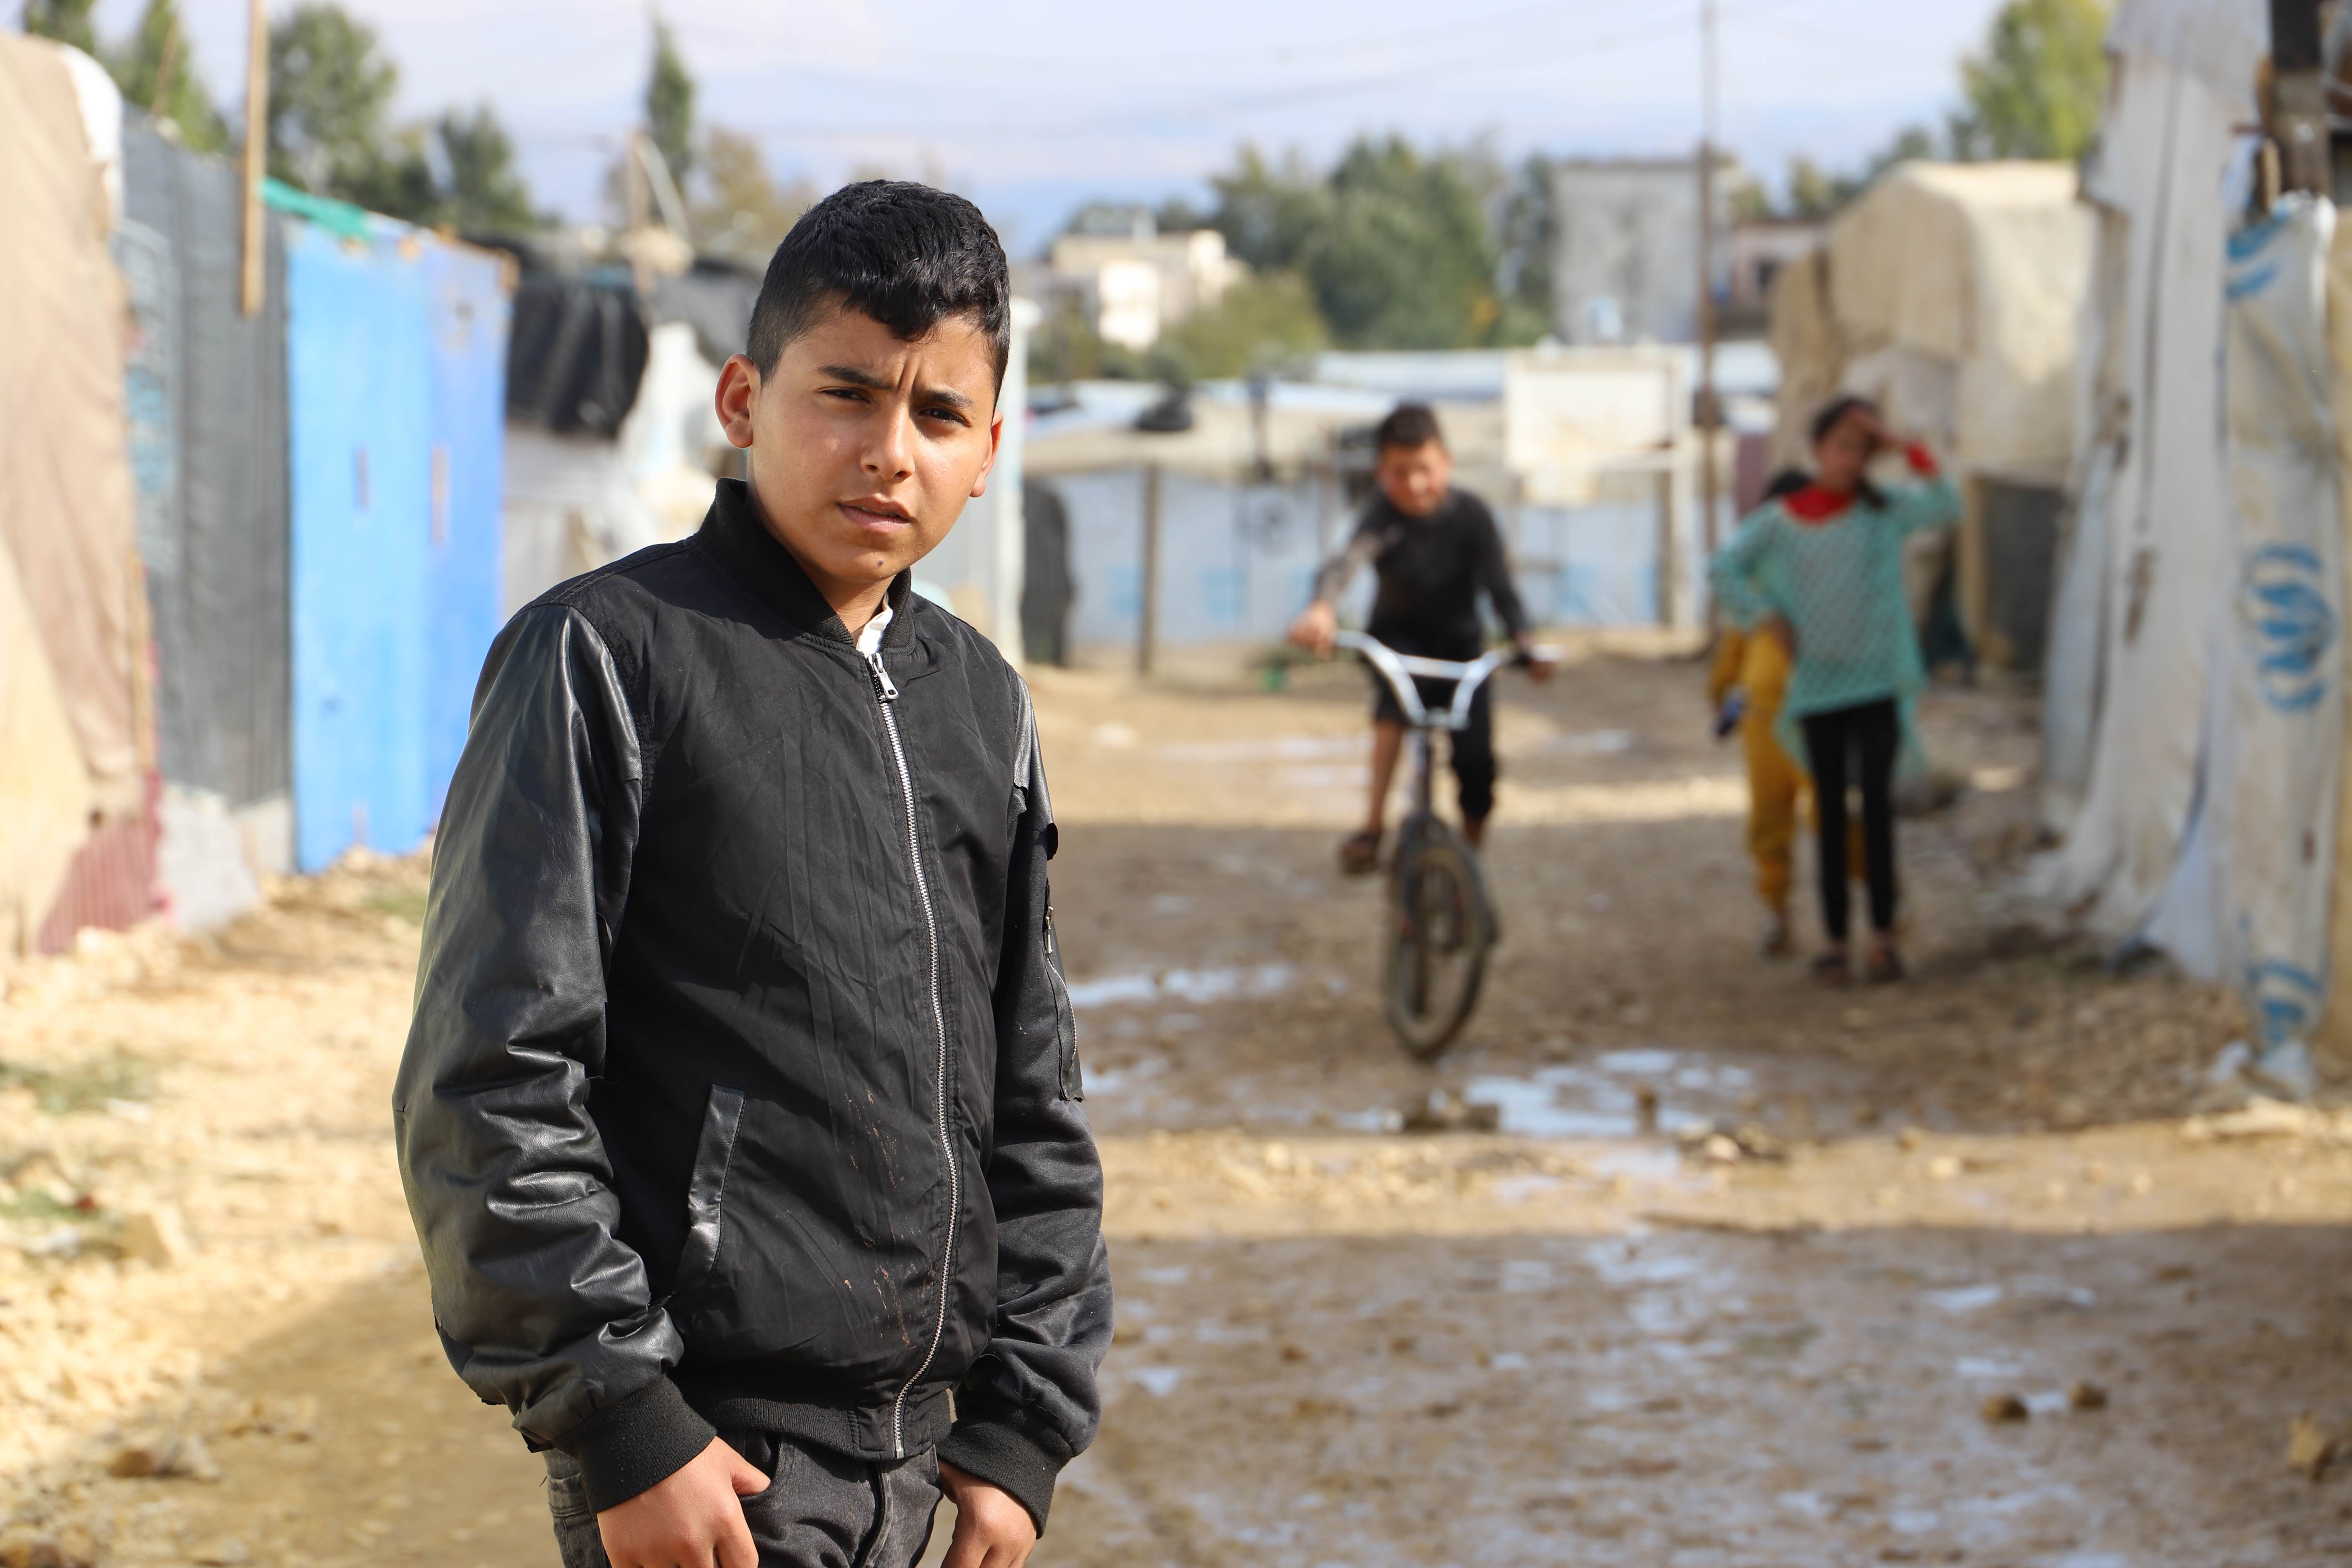 Syrian boy standing outside some tents in a refugee camp in Syria